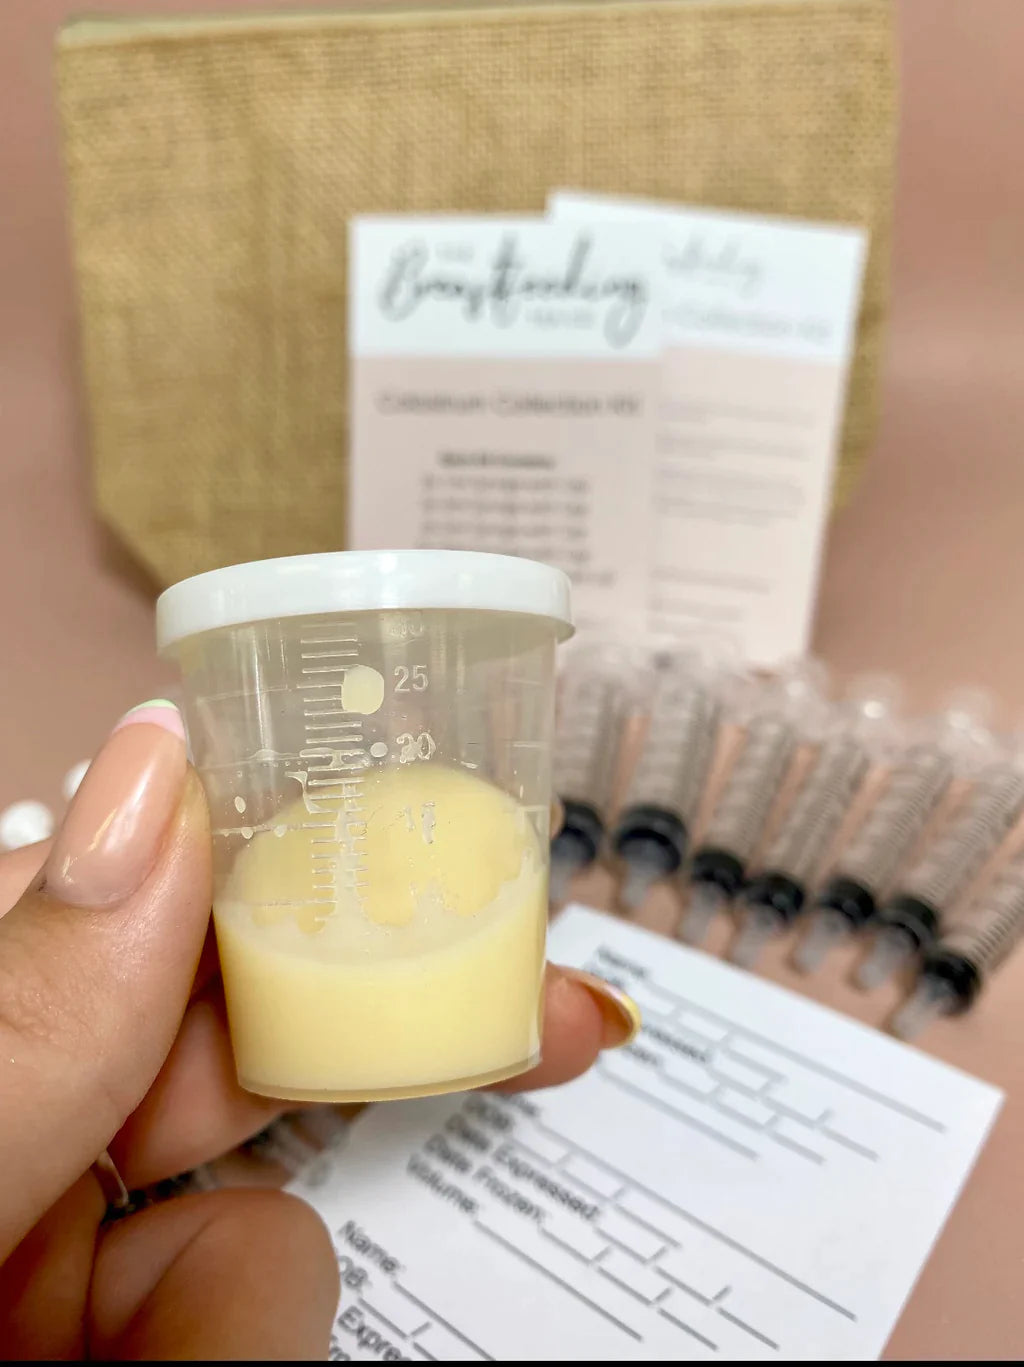 Colostrum Collection Kit Colostrum Collection from The Breastfeeding Tea Co. maternity online store brisbane sydney perth australia